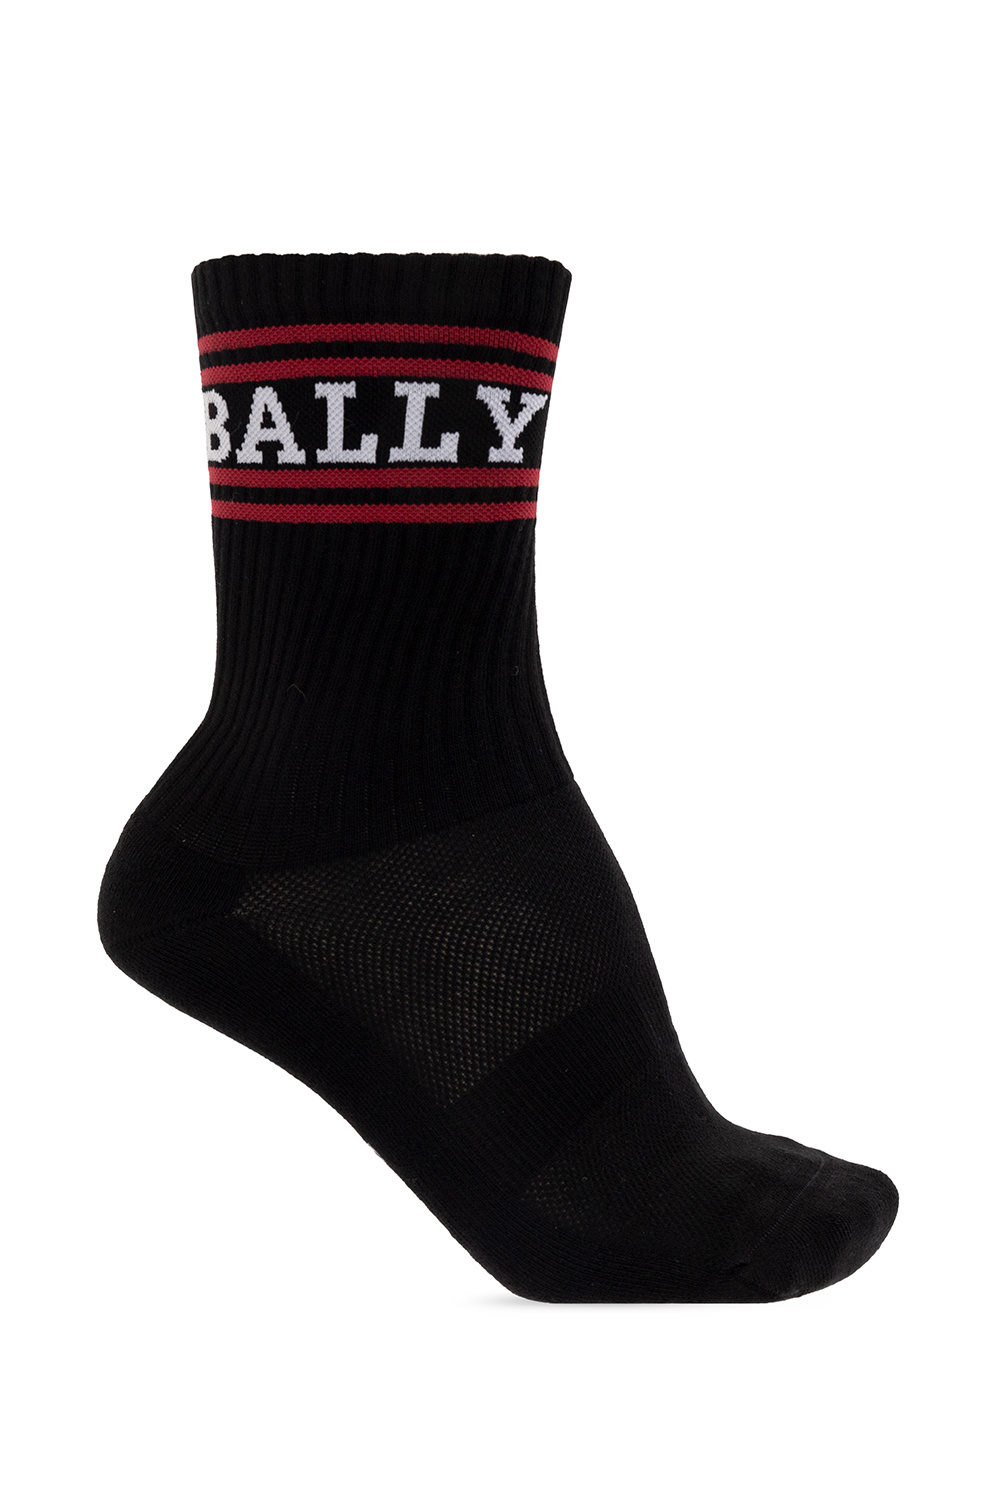 Bally Discover our suggestions